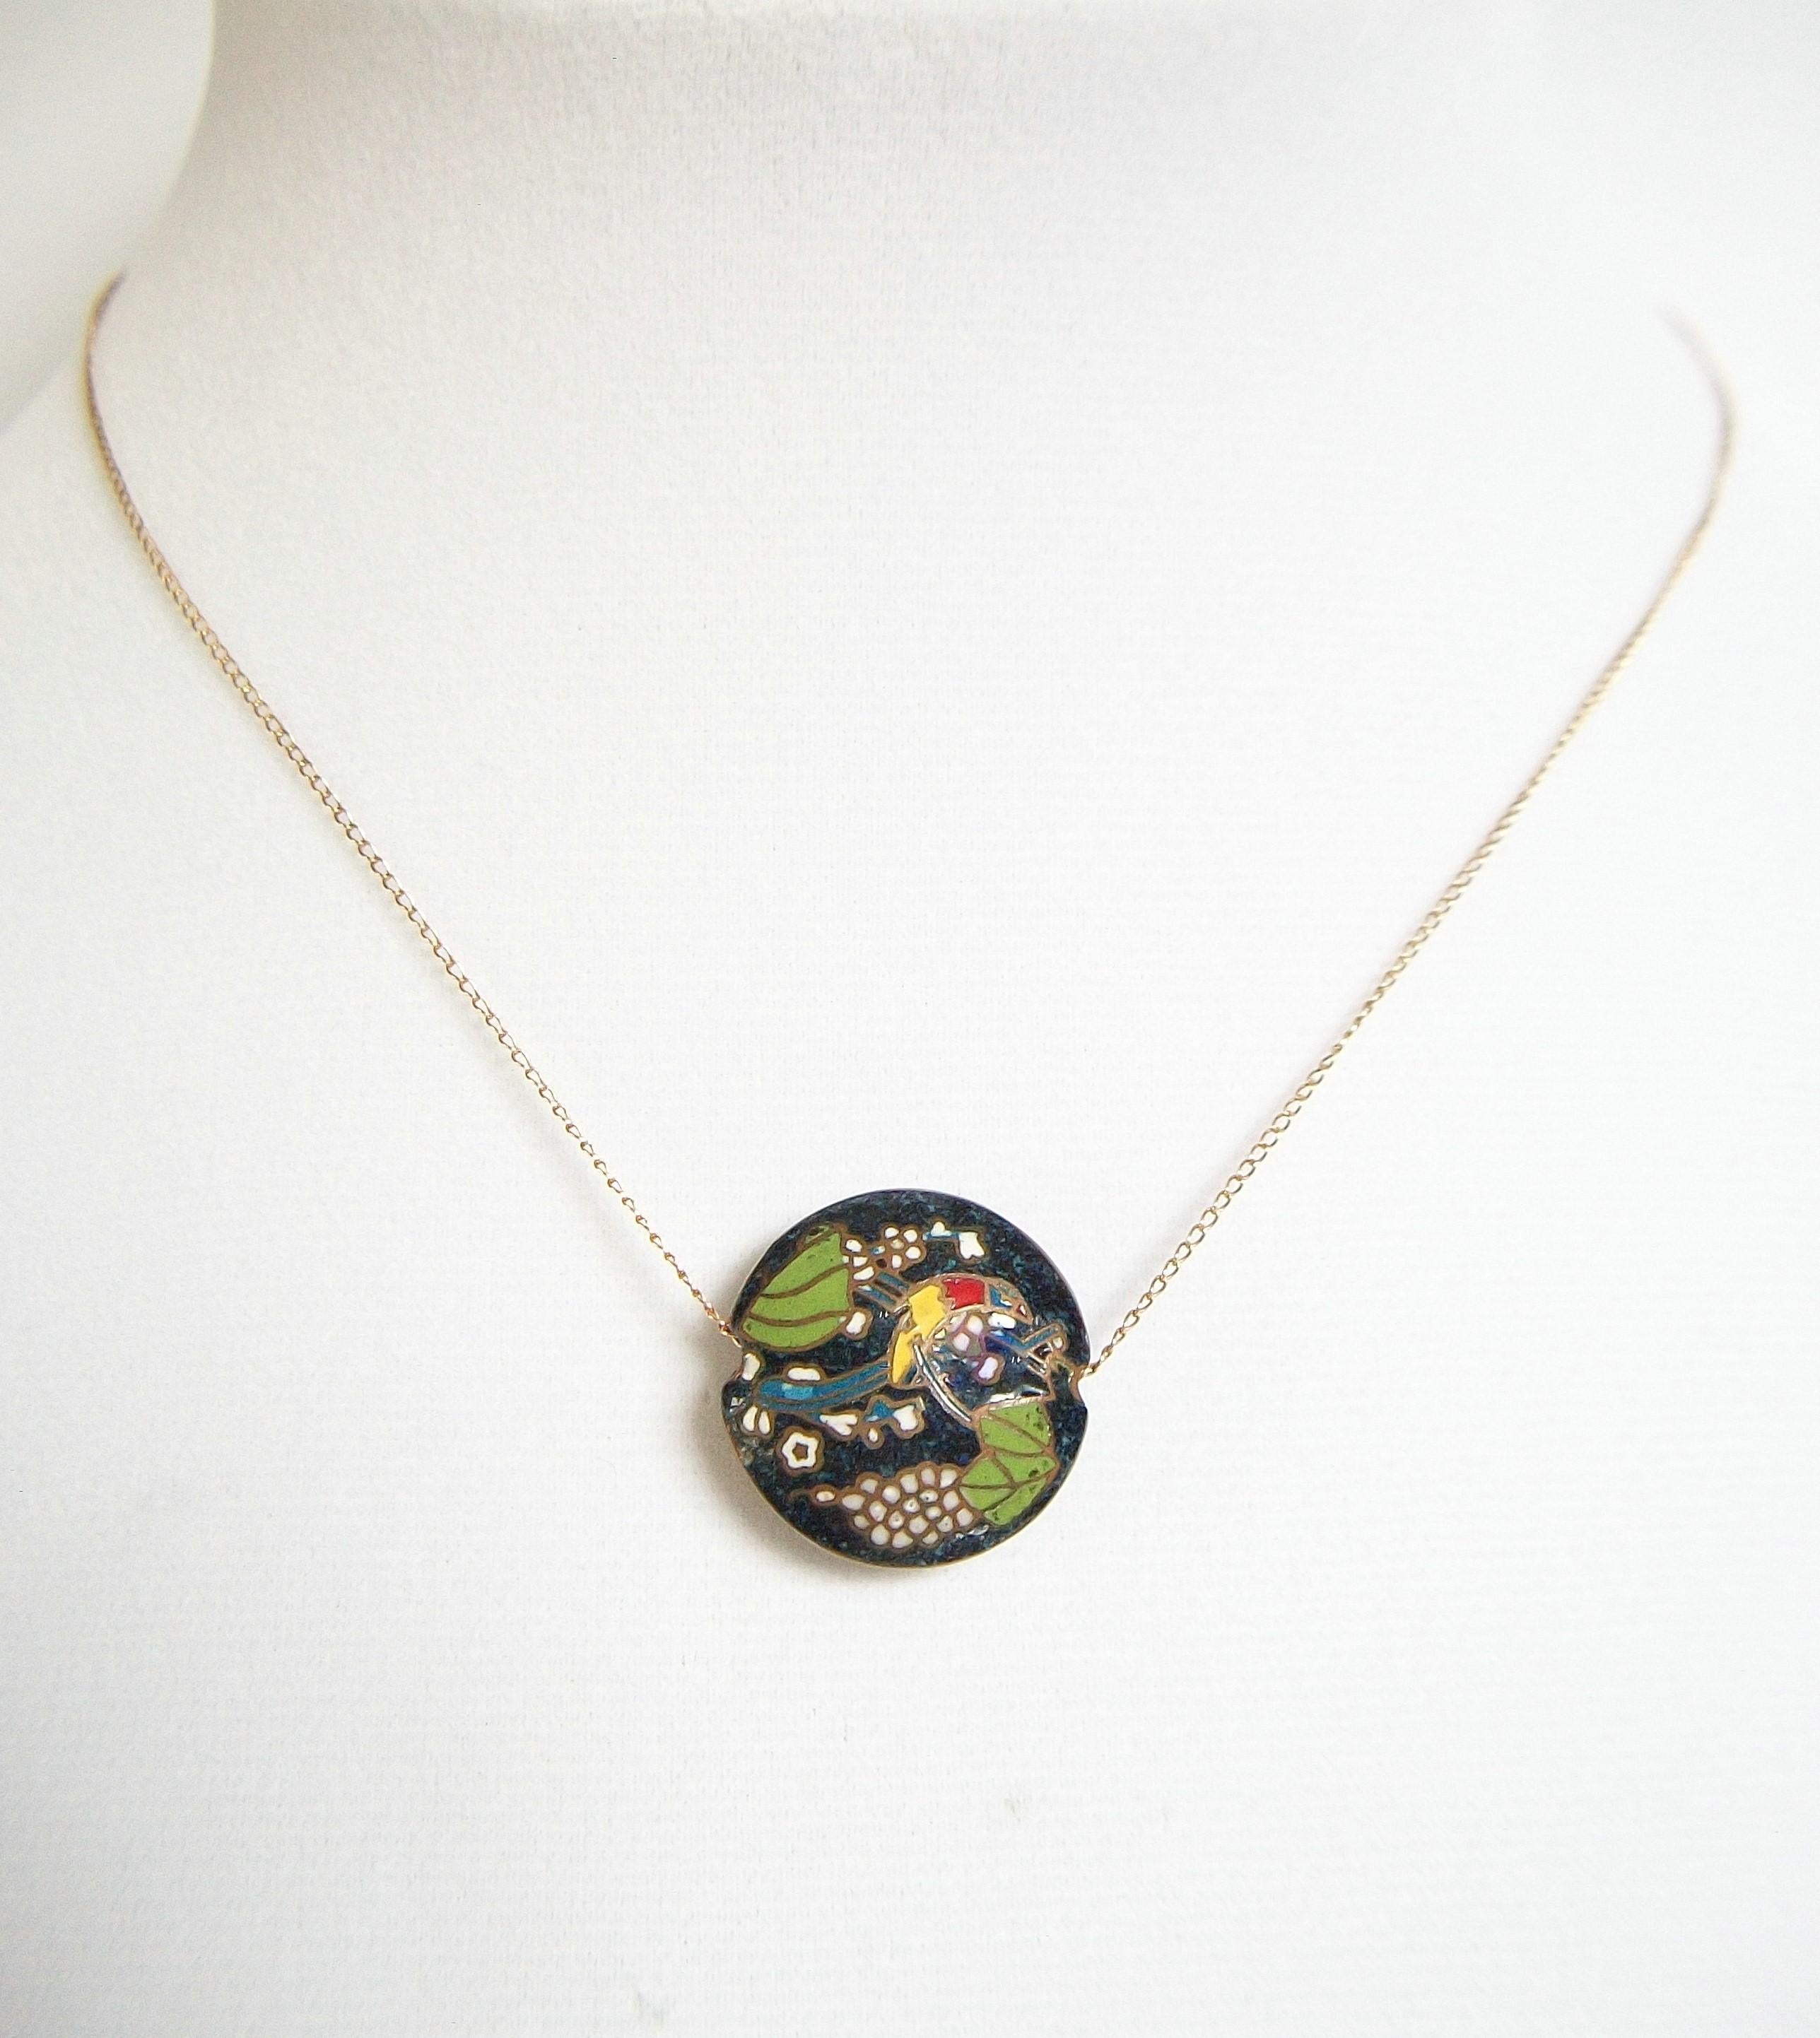 KREMENTZ - Elegant chain necklace with double sided enamel slide pendant - the round pillow shaped pendant is designed to sit at the jugular notch in the neck - multi color enamel on copper of tropical birds among flowers and greenery, set against a